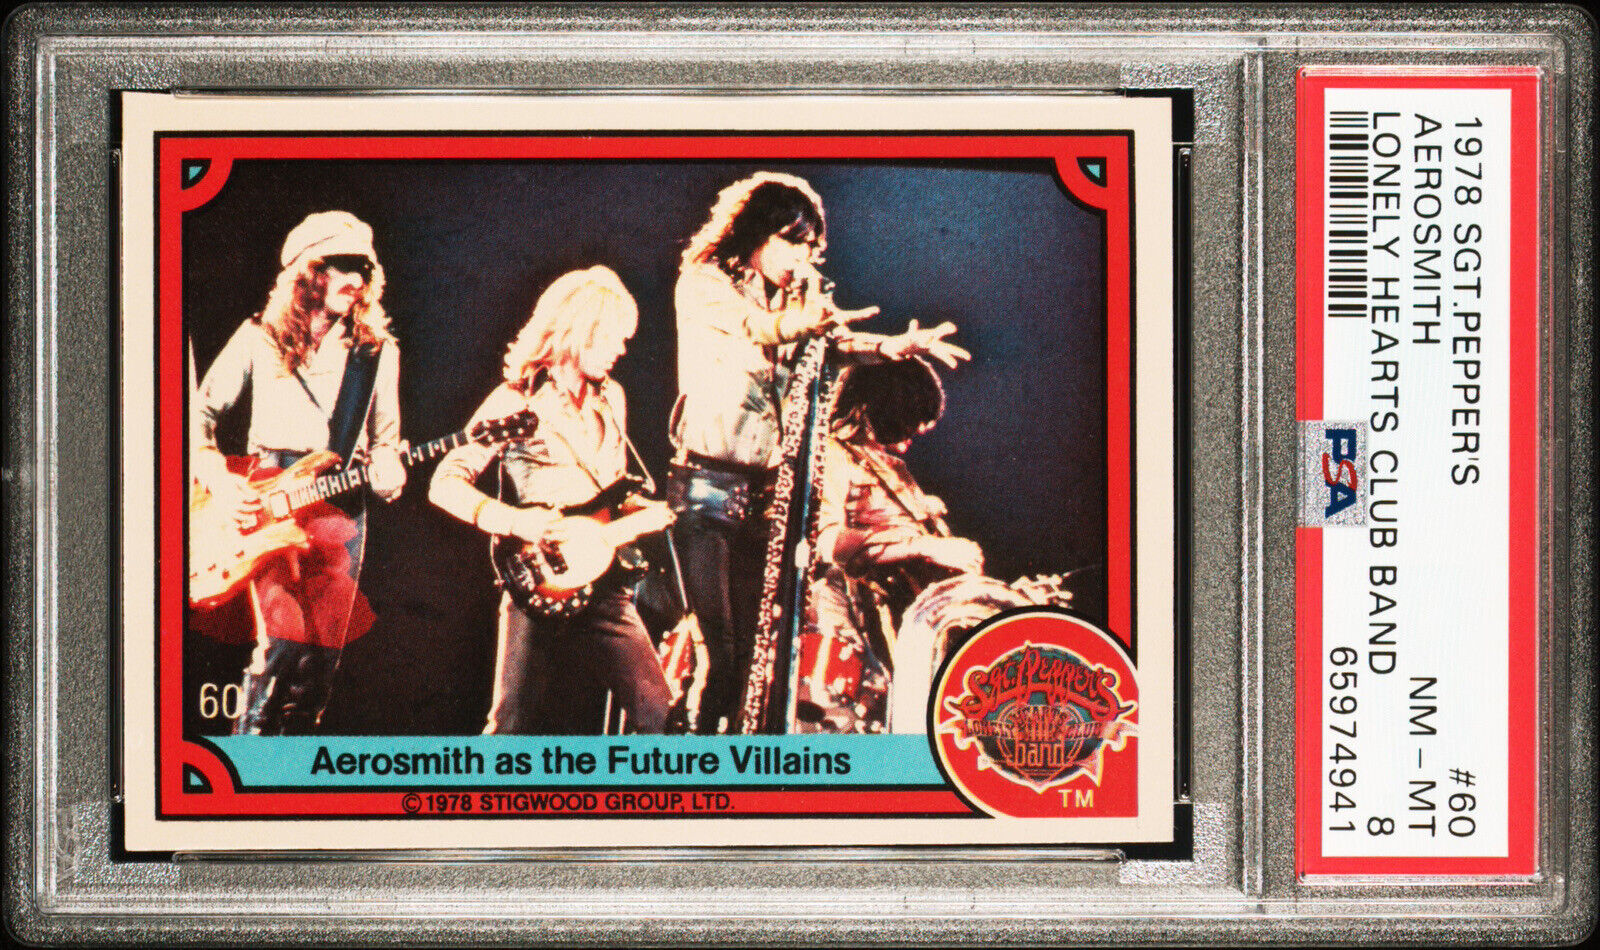 1978 Aerosmith Rookie Card Donruss PSA 8 Sgt. Peppers Lonely Hearts Club Band 60